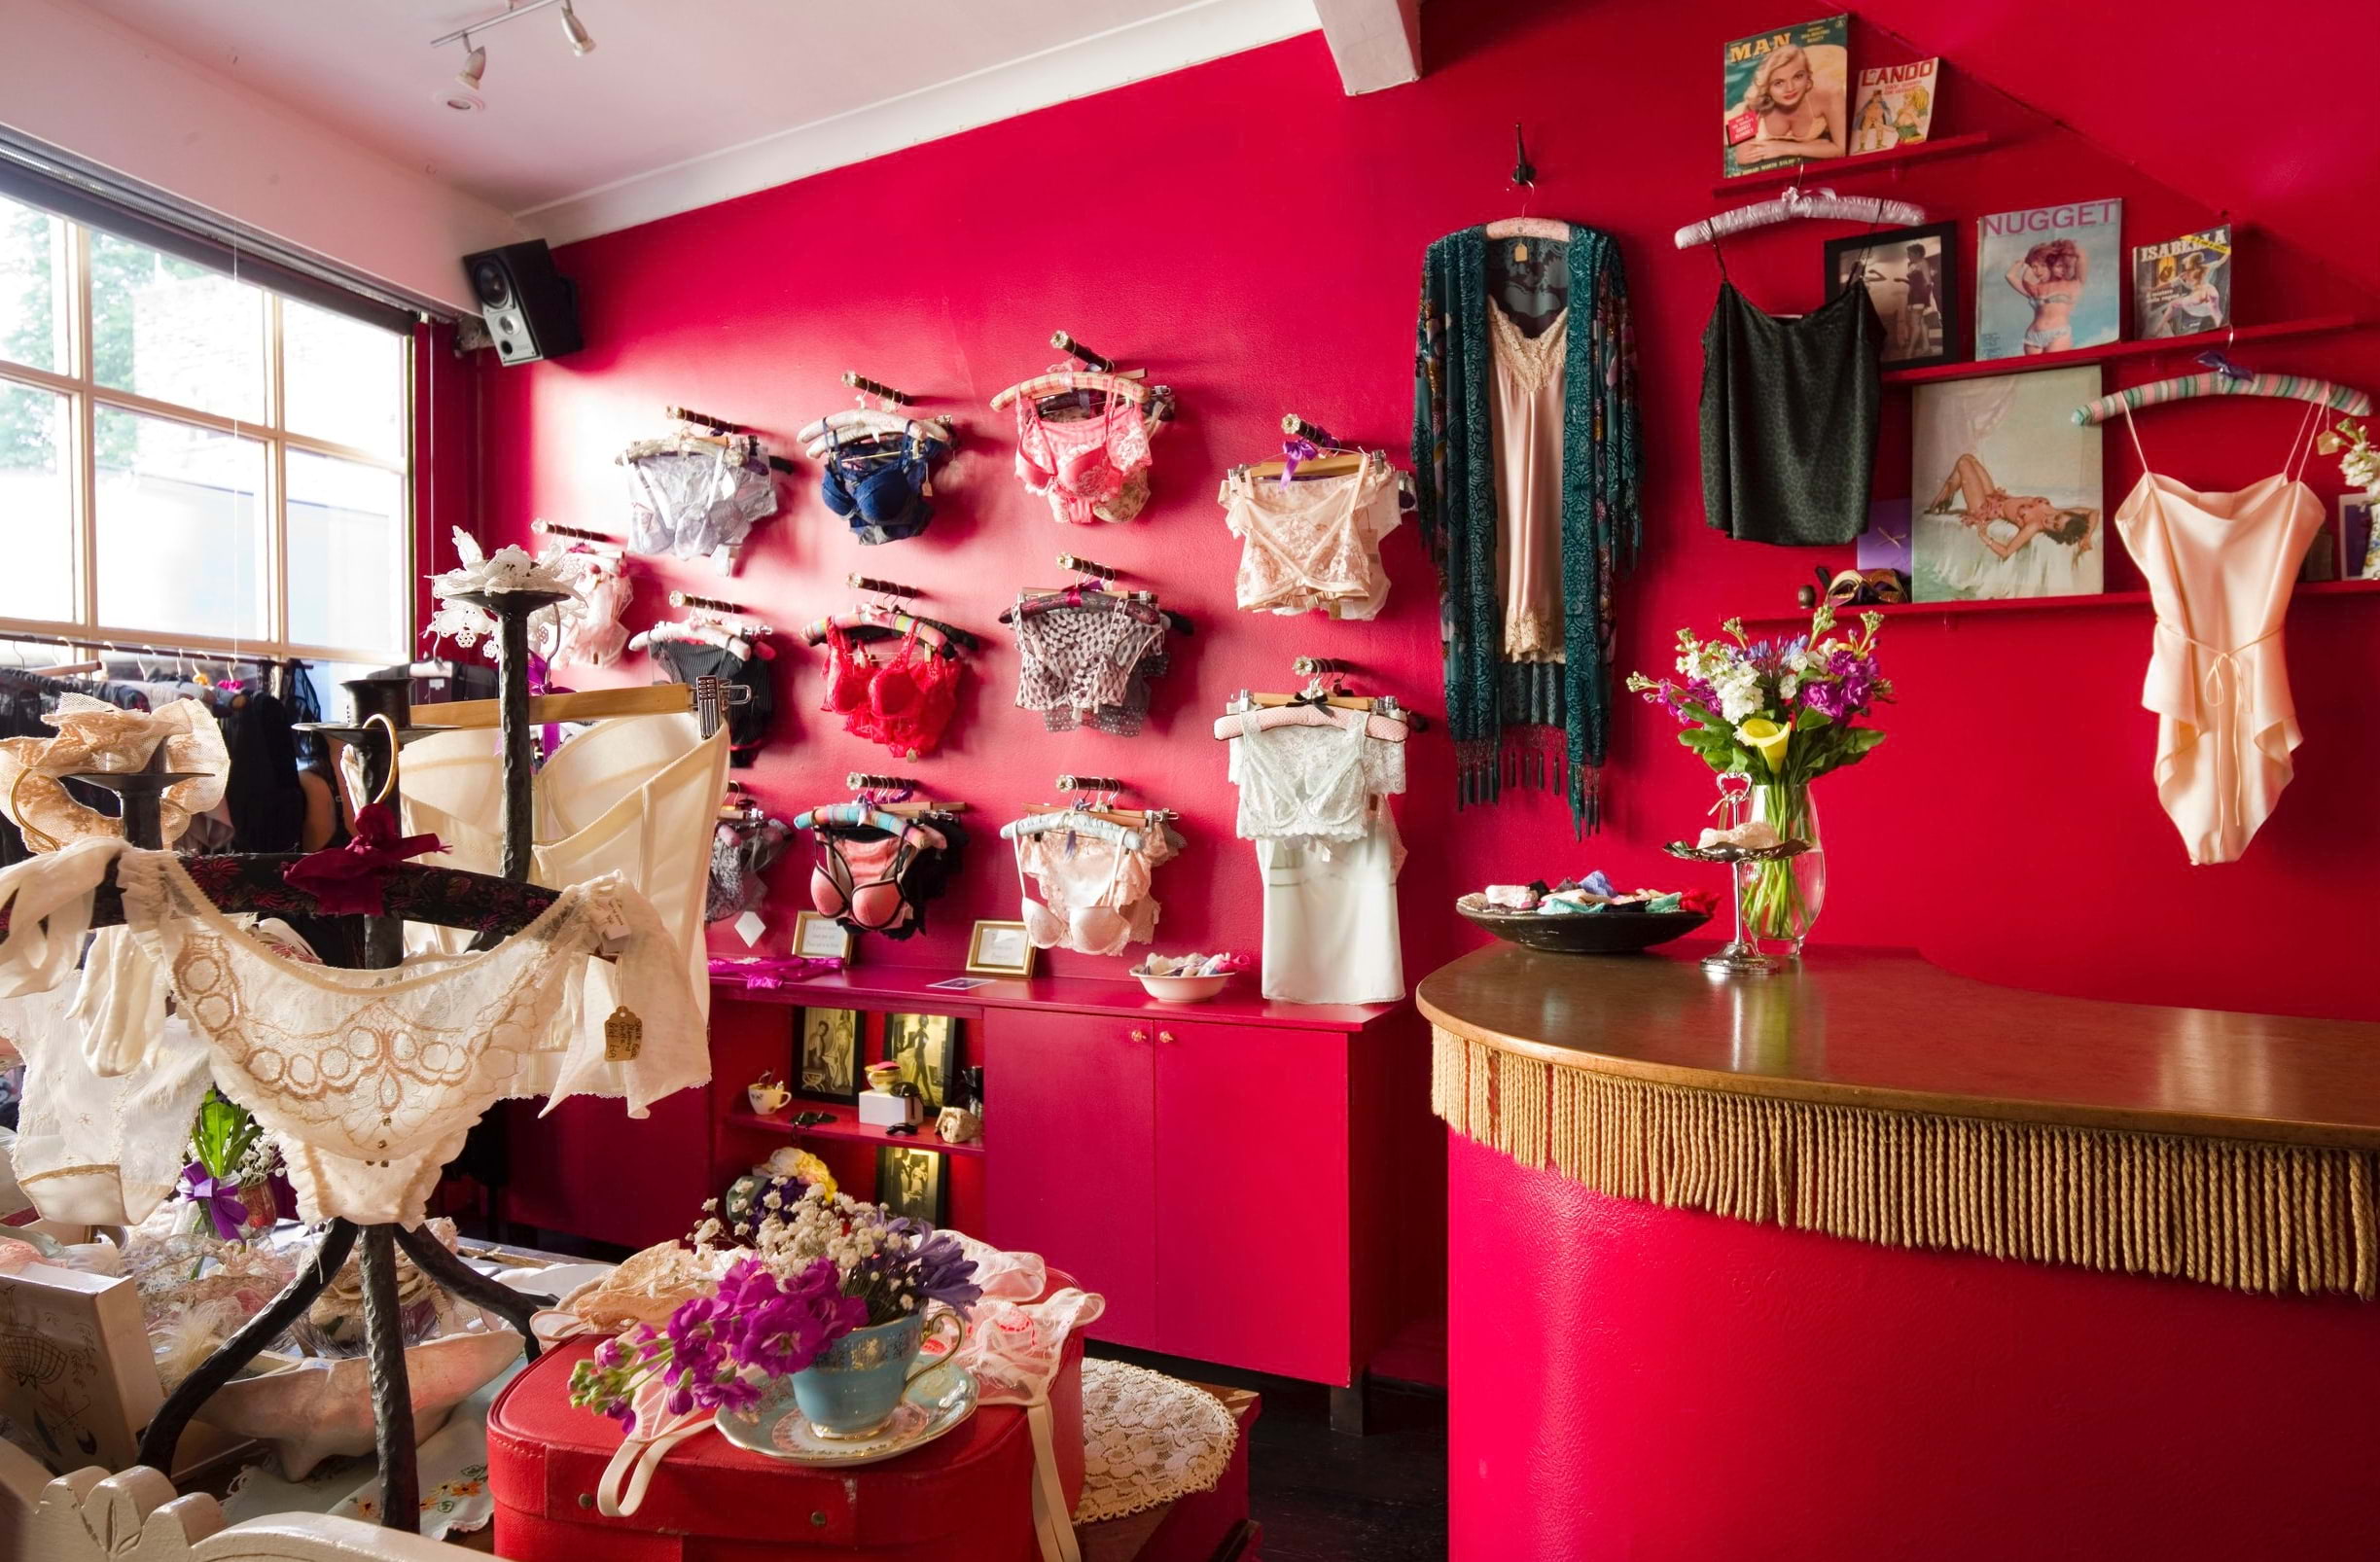 The best lingerie shops in London – Thatsup